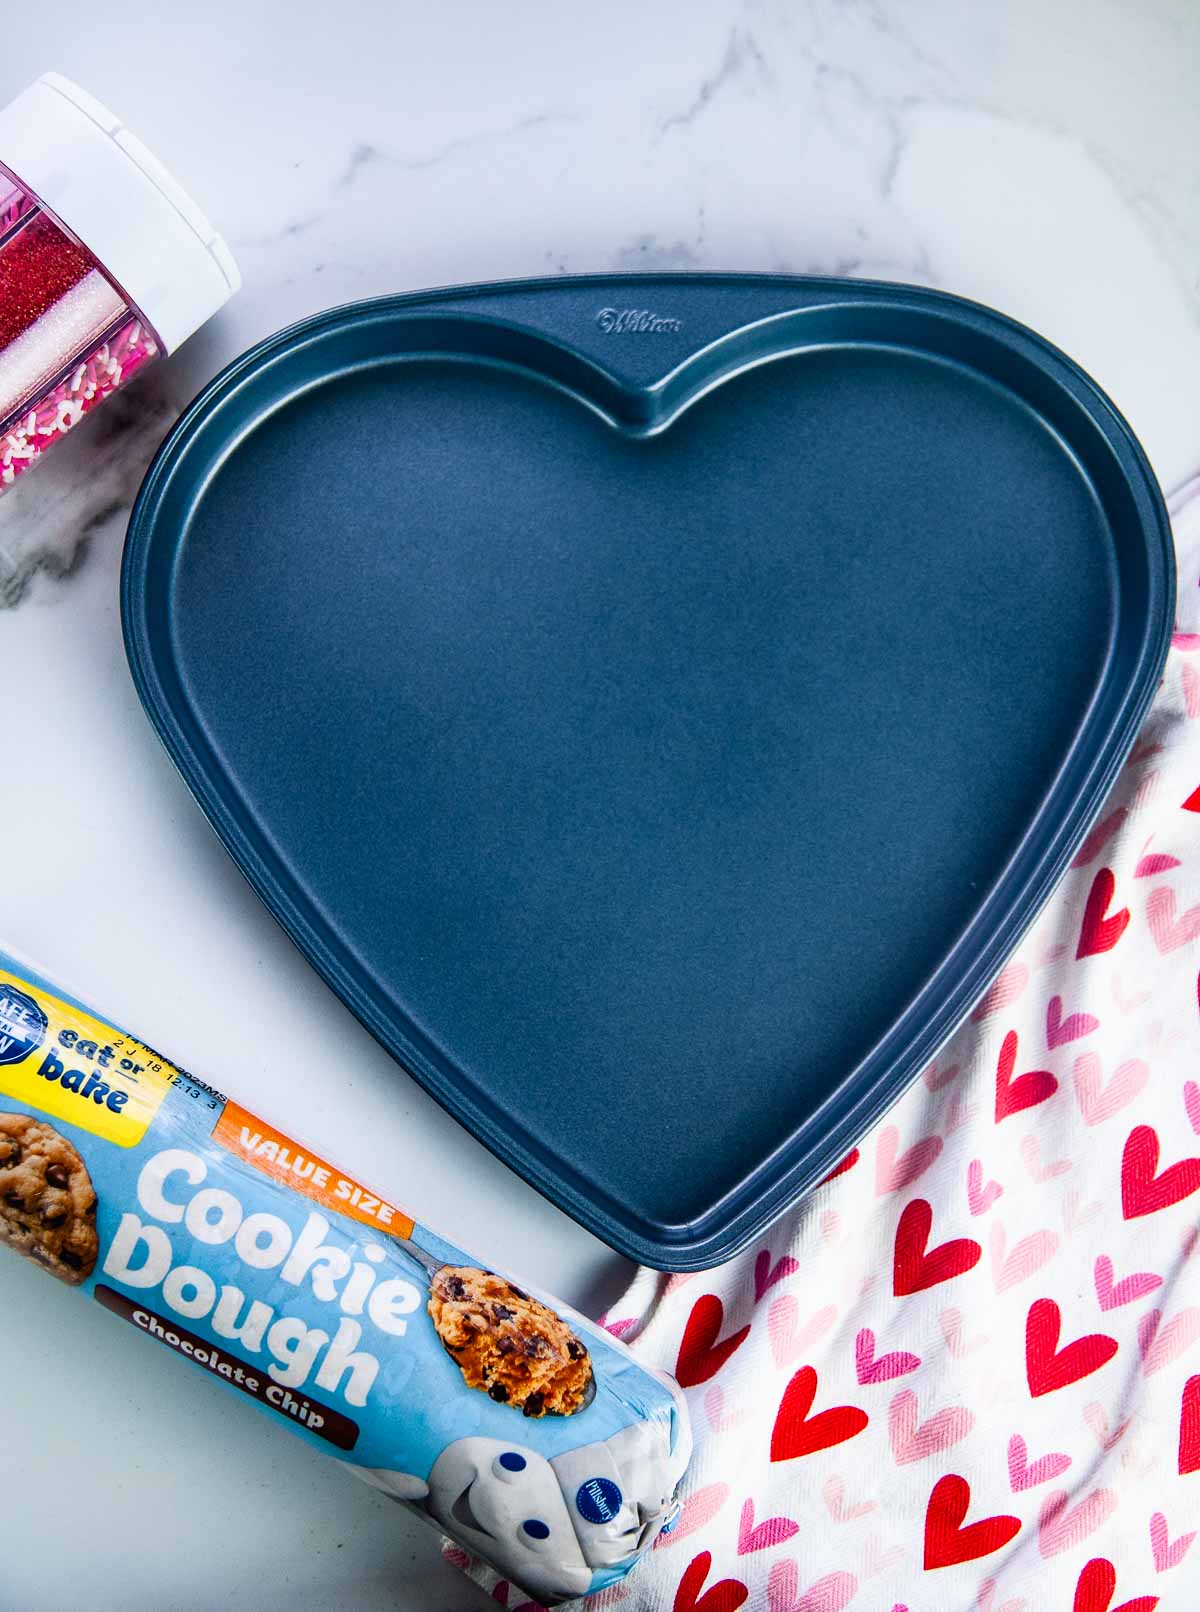 Supplies for a giant heart shaped cookie for Valentine's Day: Cookie Dough, Heart shaped pan, and Sprinkles